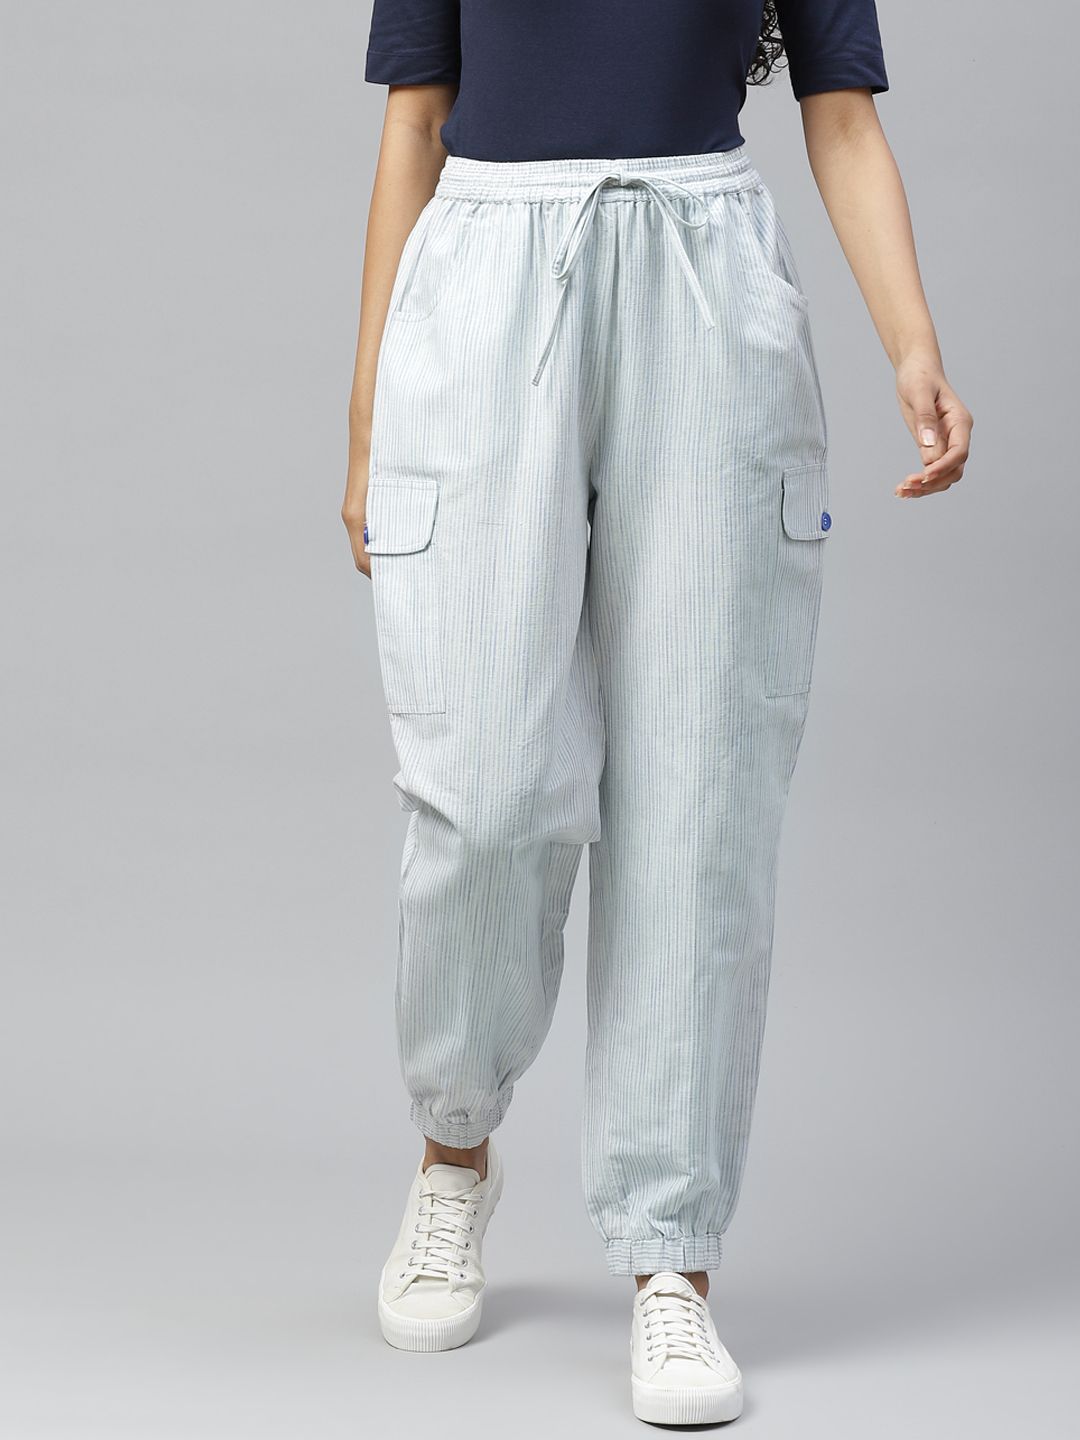 Tulsattva Women Off-White & Blue Relaxed Striped Cotton Joggers Price in India